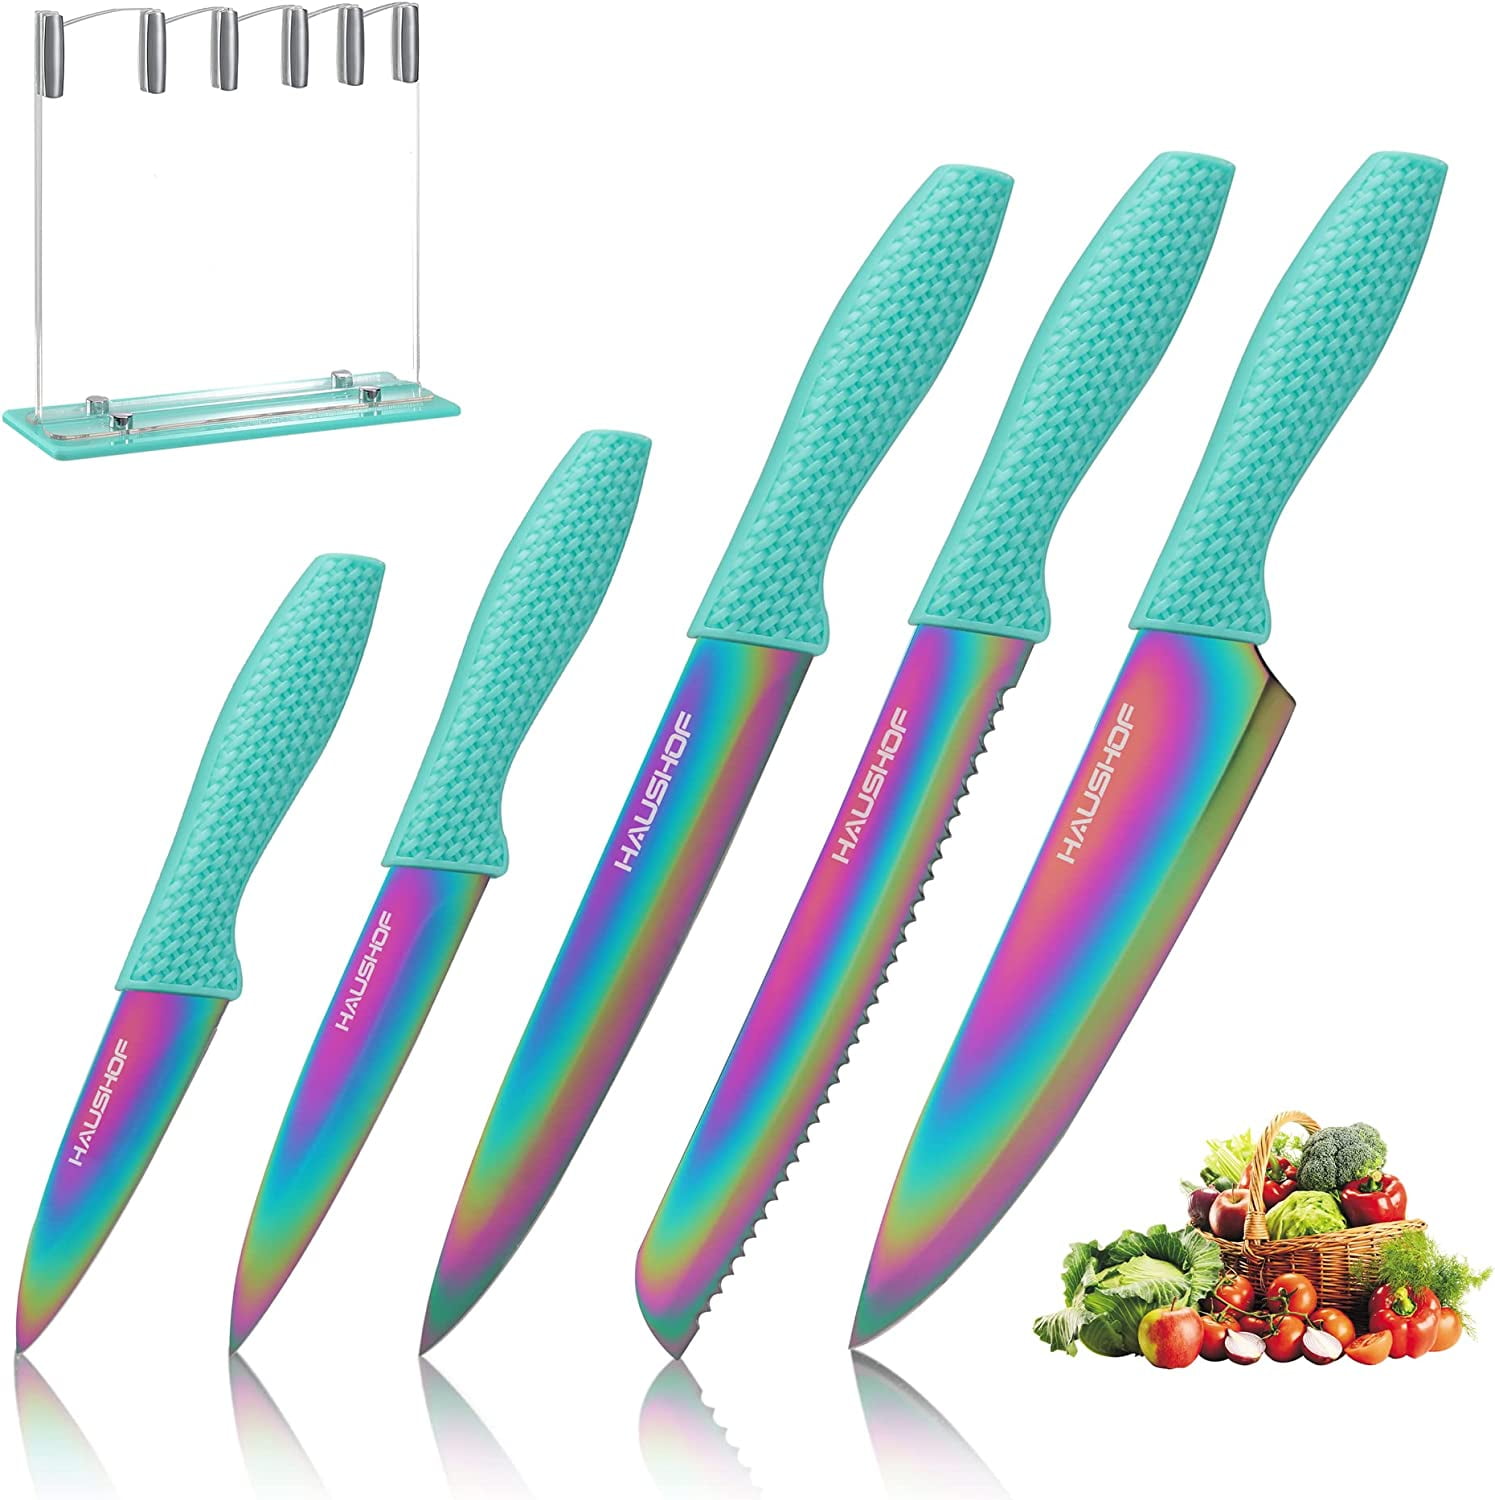 Rainbow Kitchen Knife Set Non Stick Knives Set with Block Thick Blade  Cutlery Knife Block Sets Chef Sharp Quality for Home & Pro Use Best Gift  (Orange